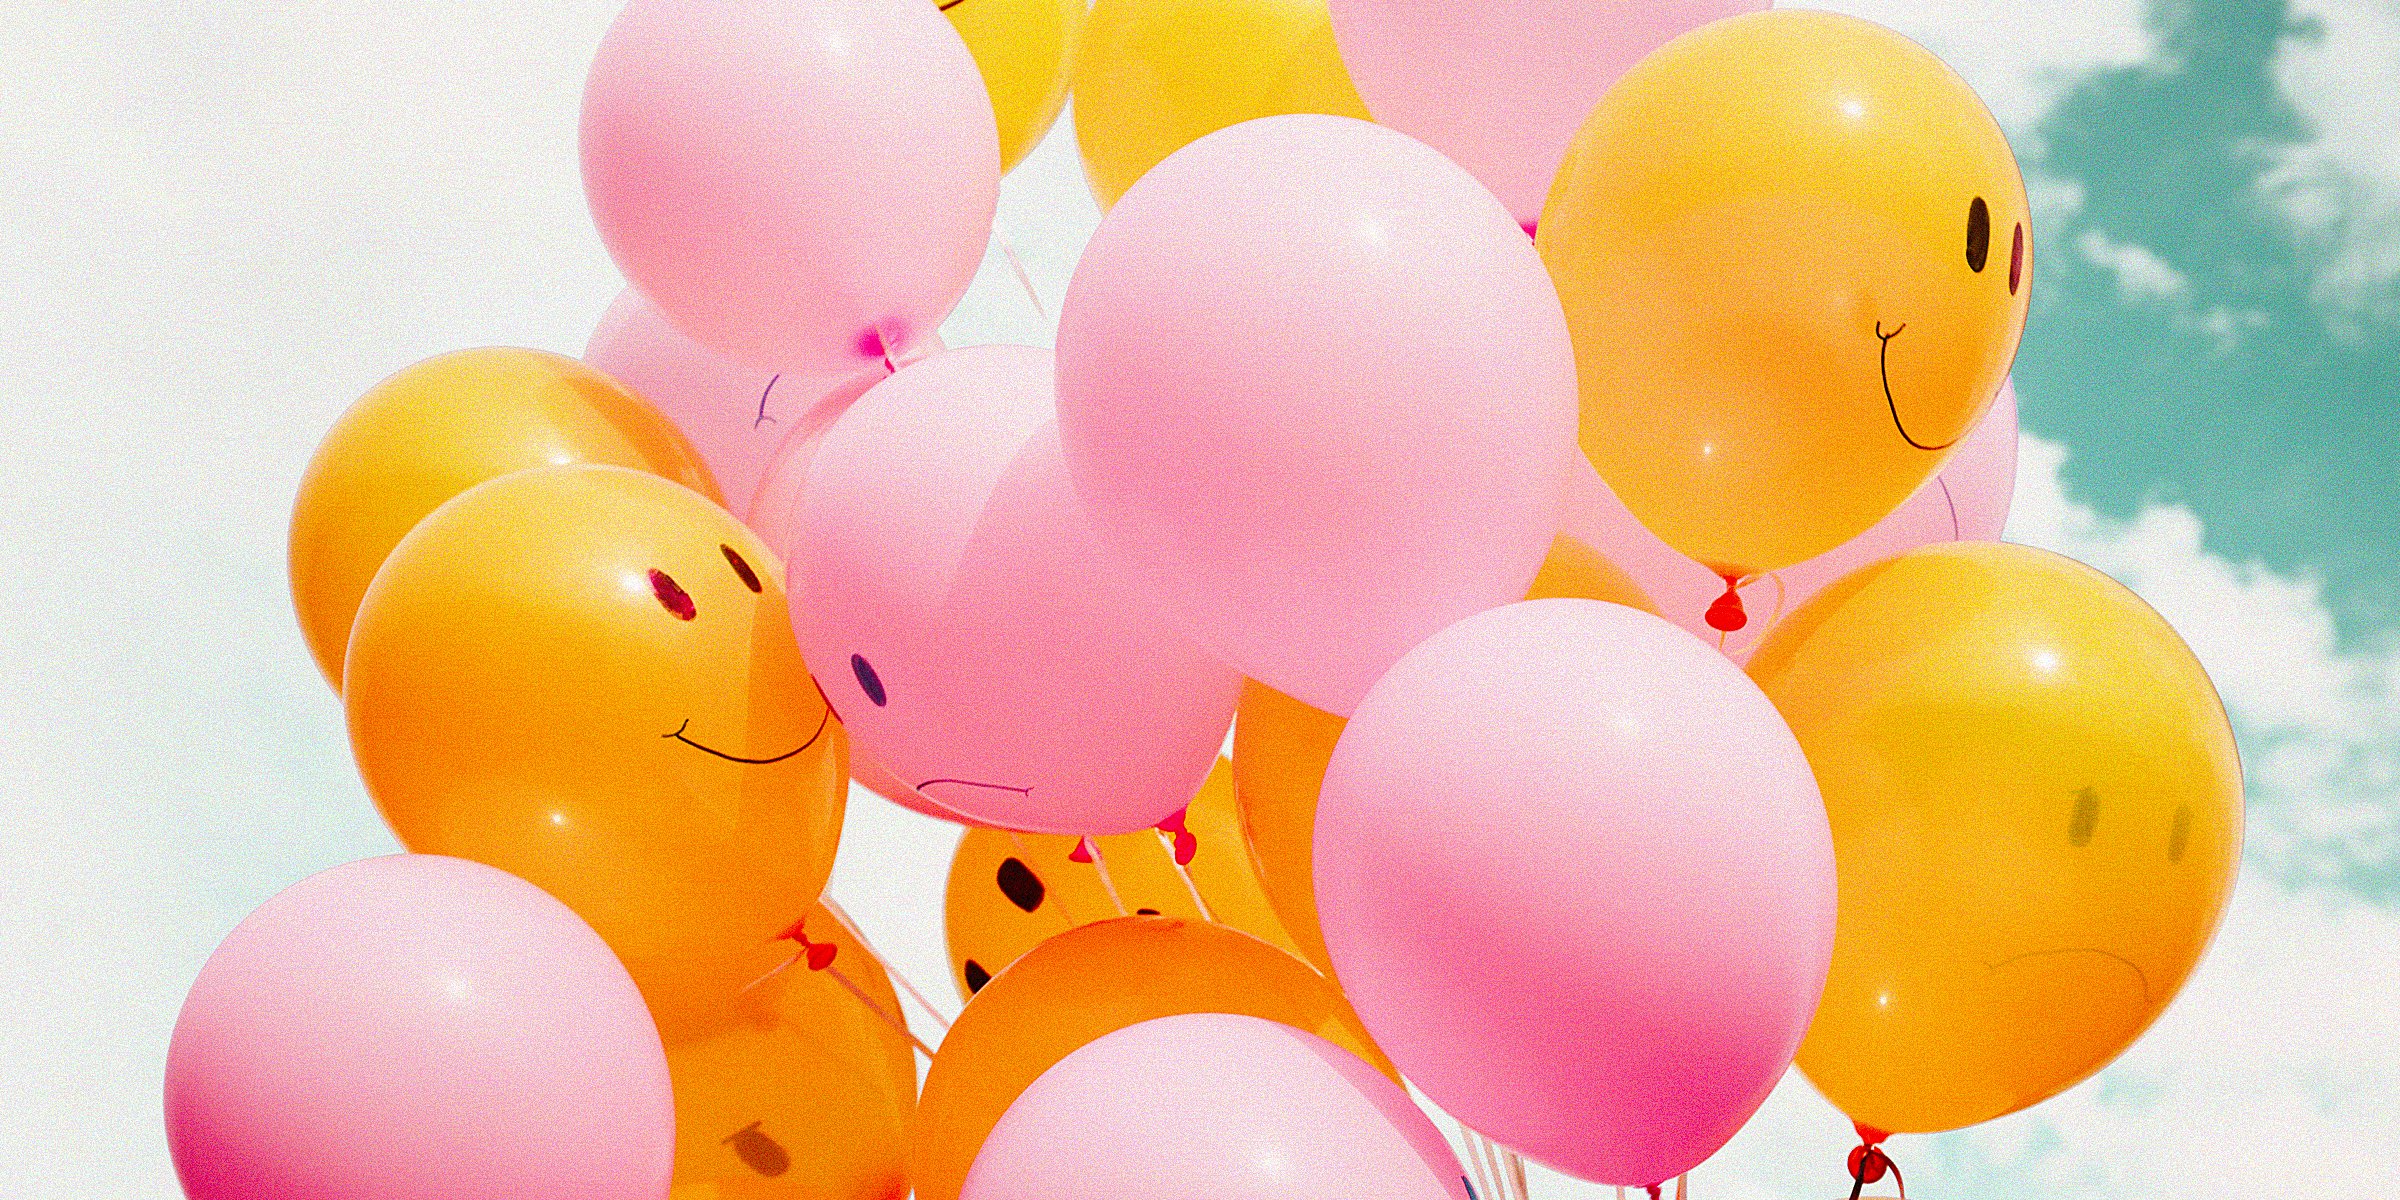 Unsplash | A bunch of orange and pink balloons